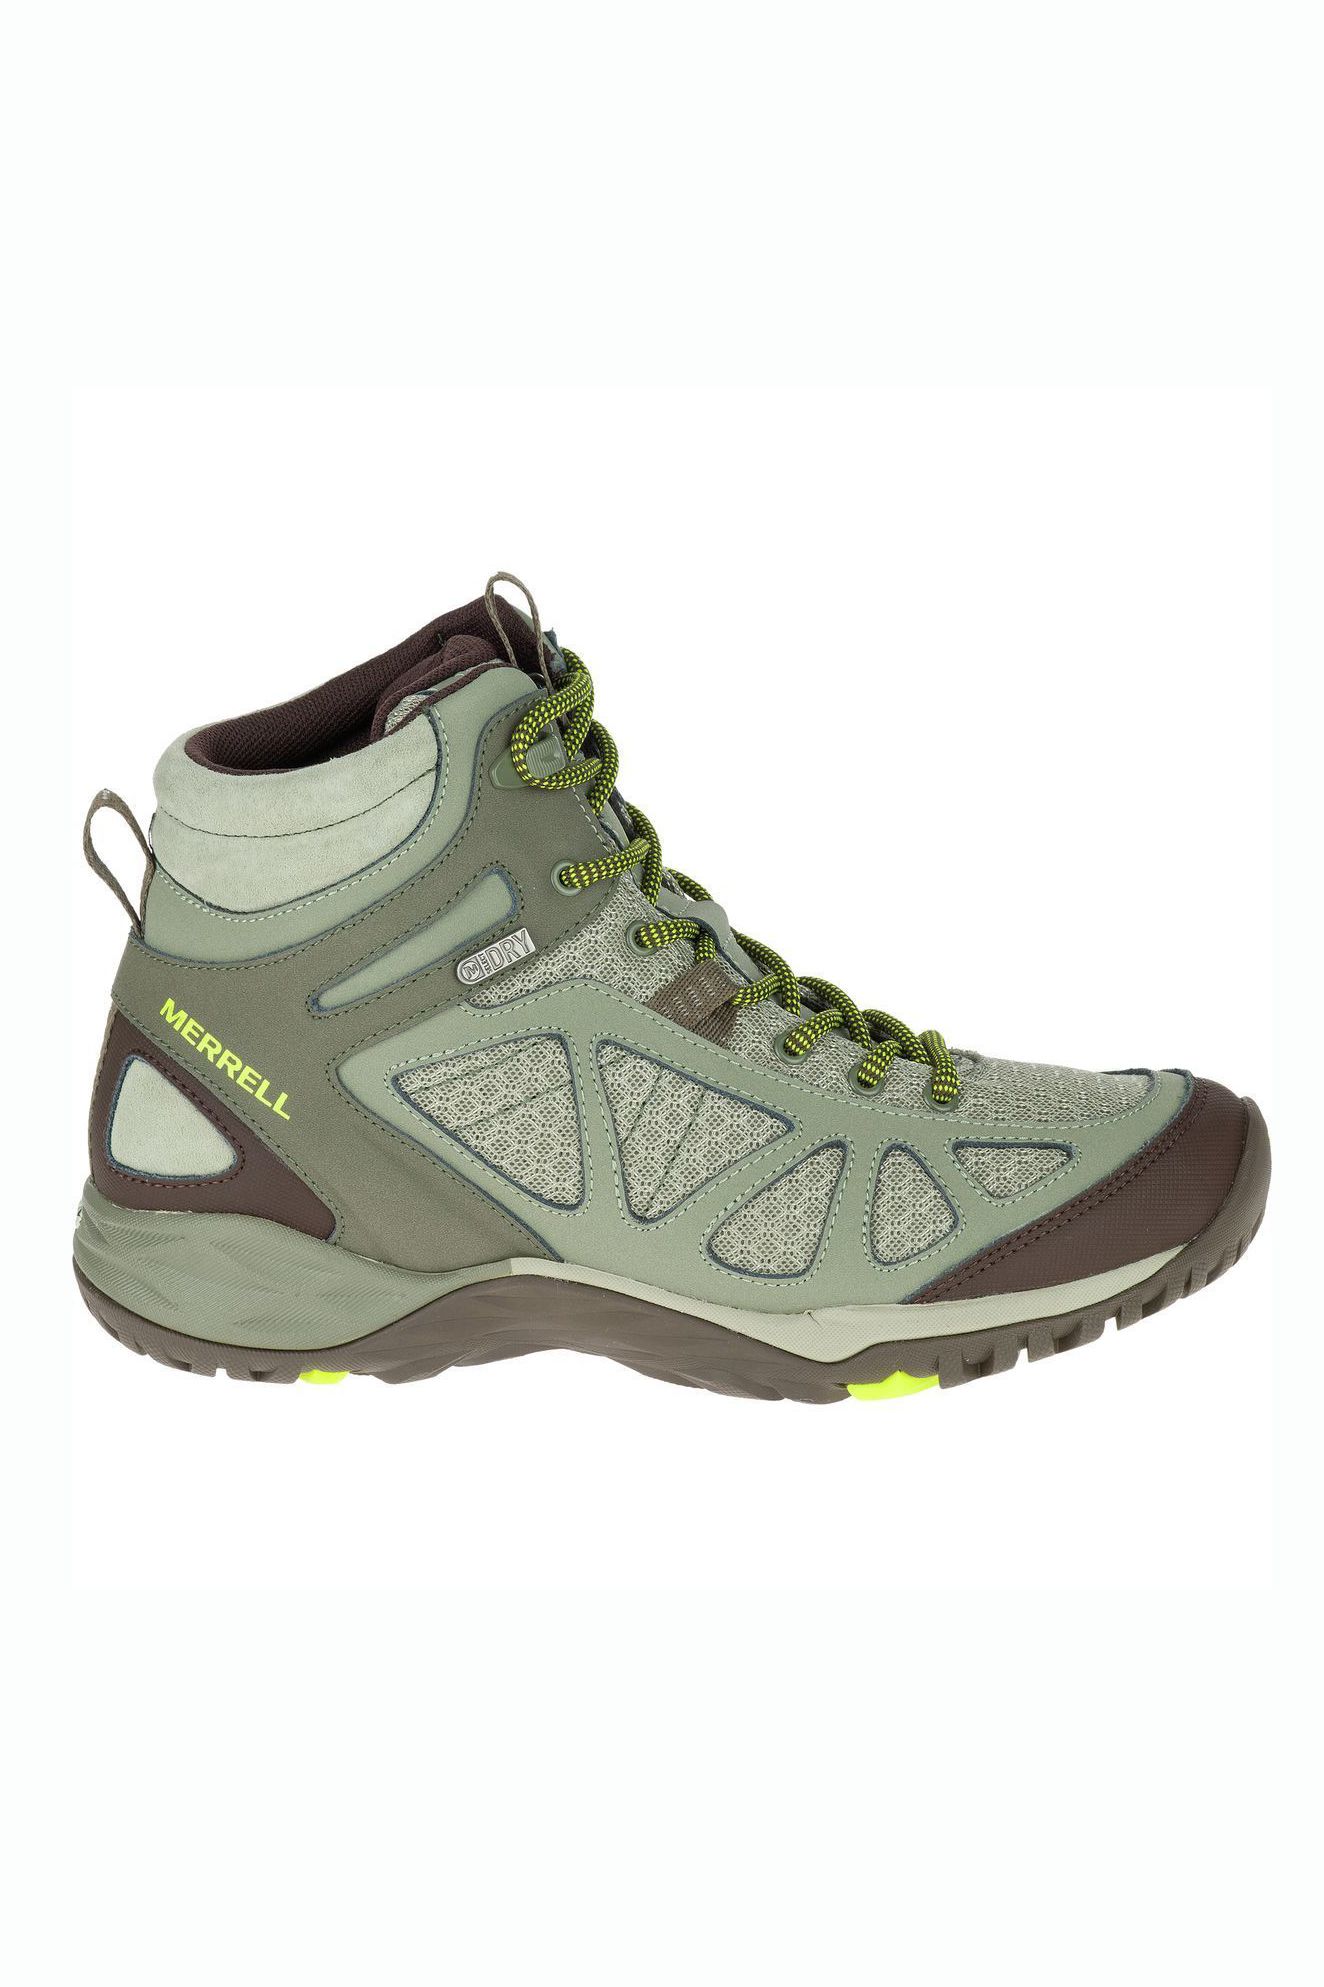 good hiking shoes for beginners